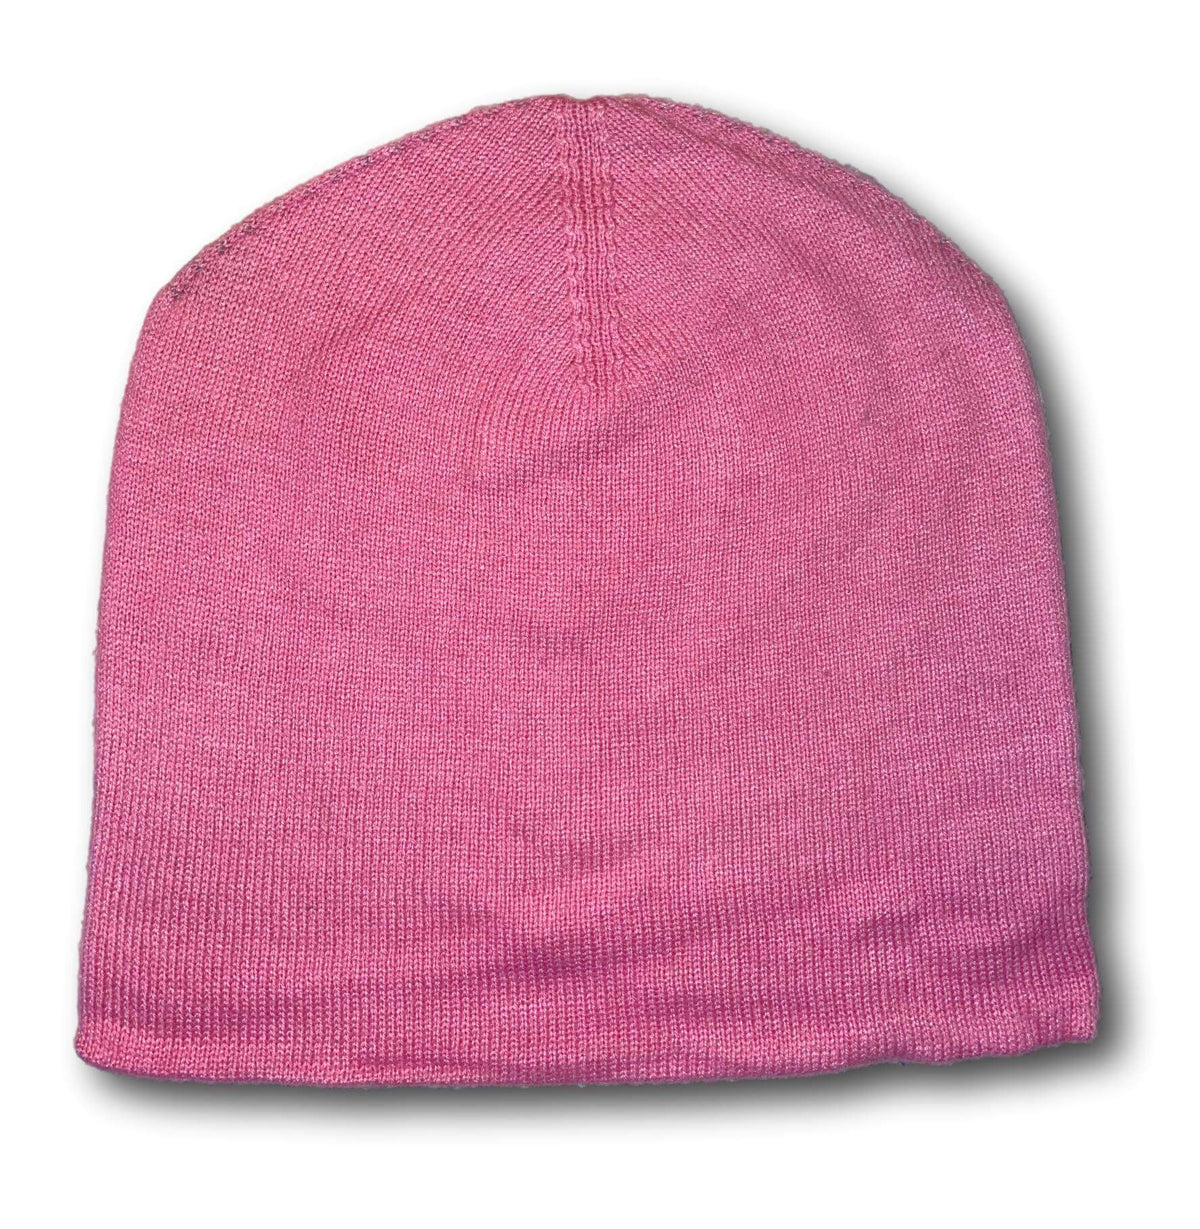 CASHMERE BEANIE - HANDMADE IN NEPAL 🇳🇵 UNISEX &amp; ONE SIZE FITS MOST + SINGING BOWLS AND MEDITATION